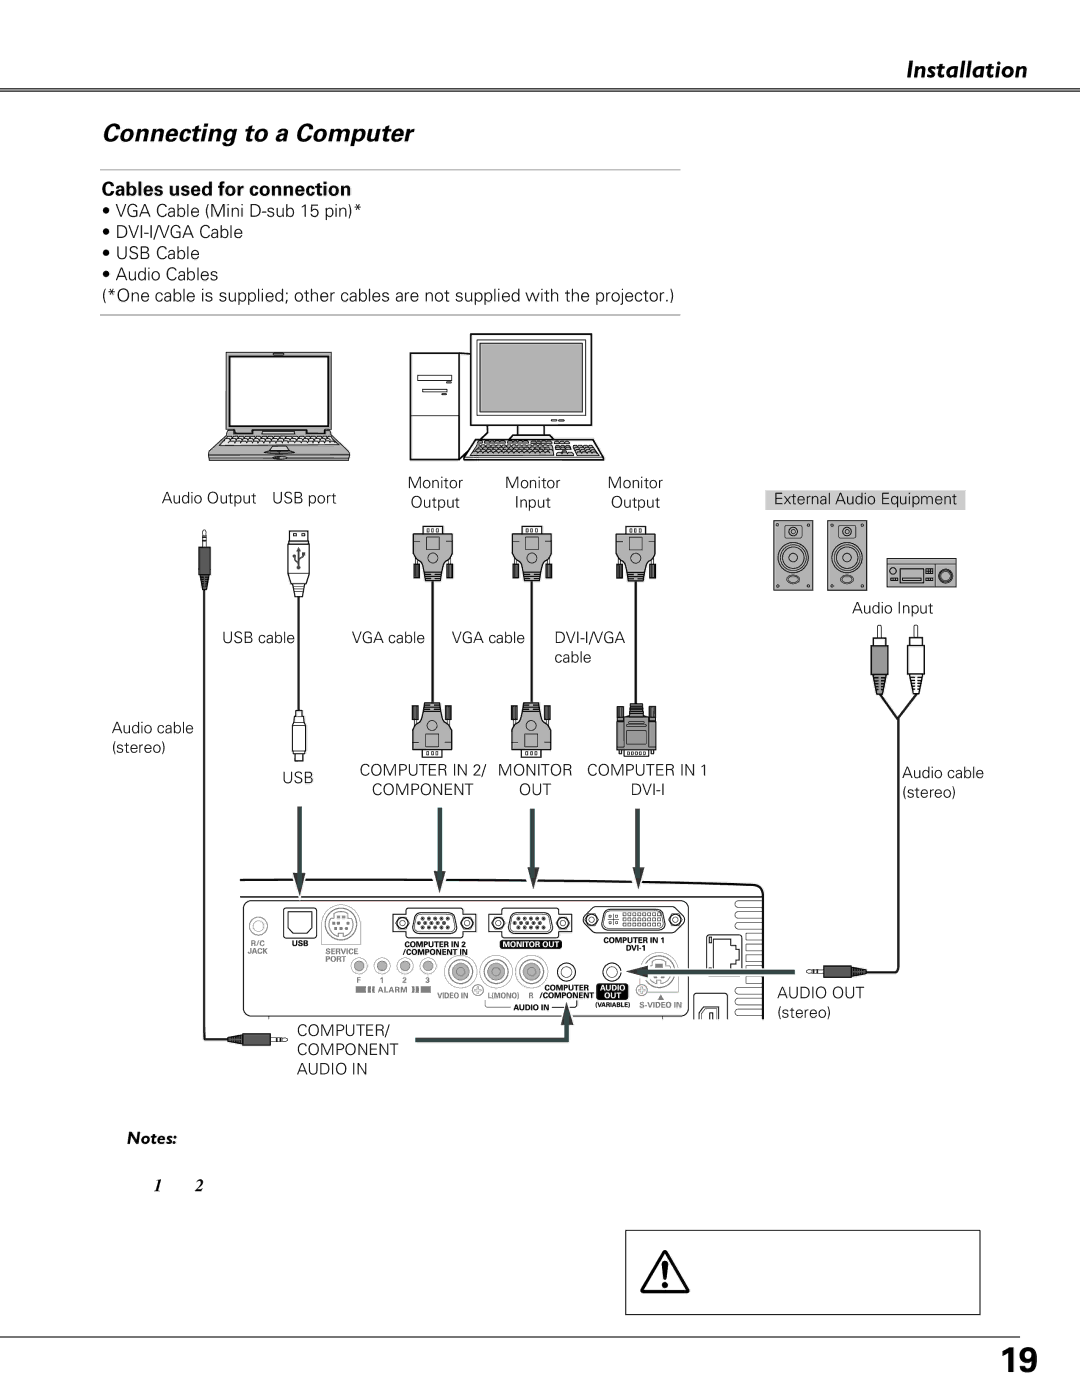 Eiki LC-XB40N owner manual Installation Connecting to a Computer, Cables used for connection 